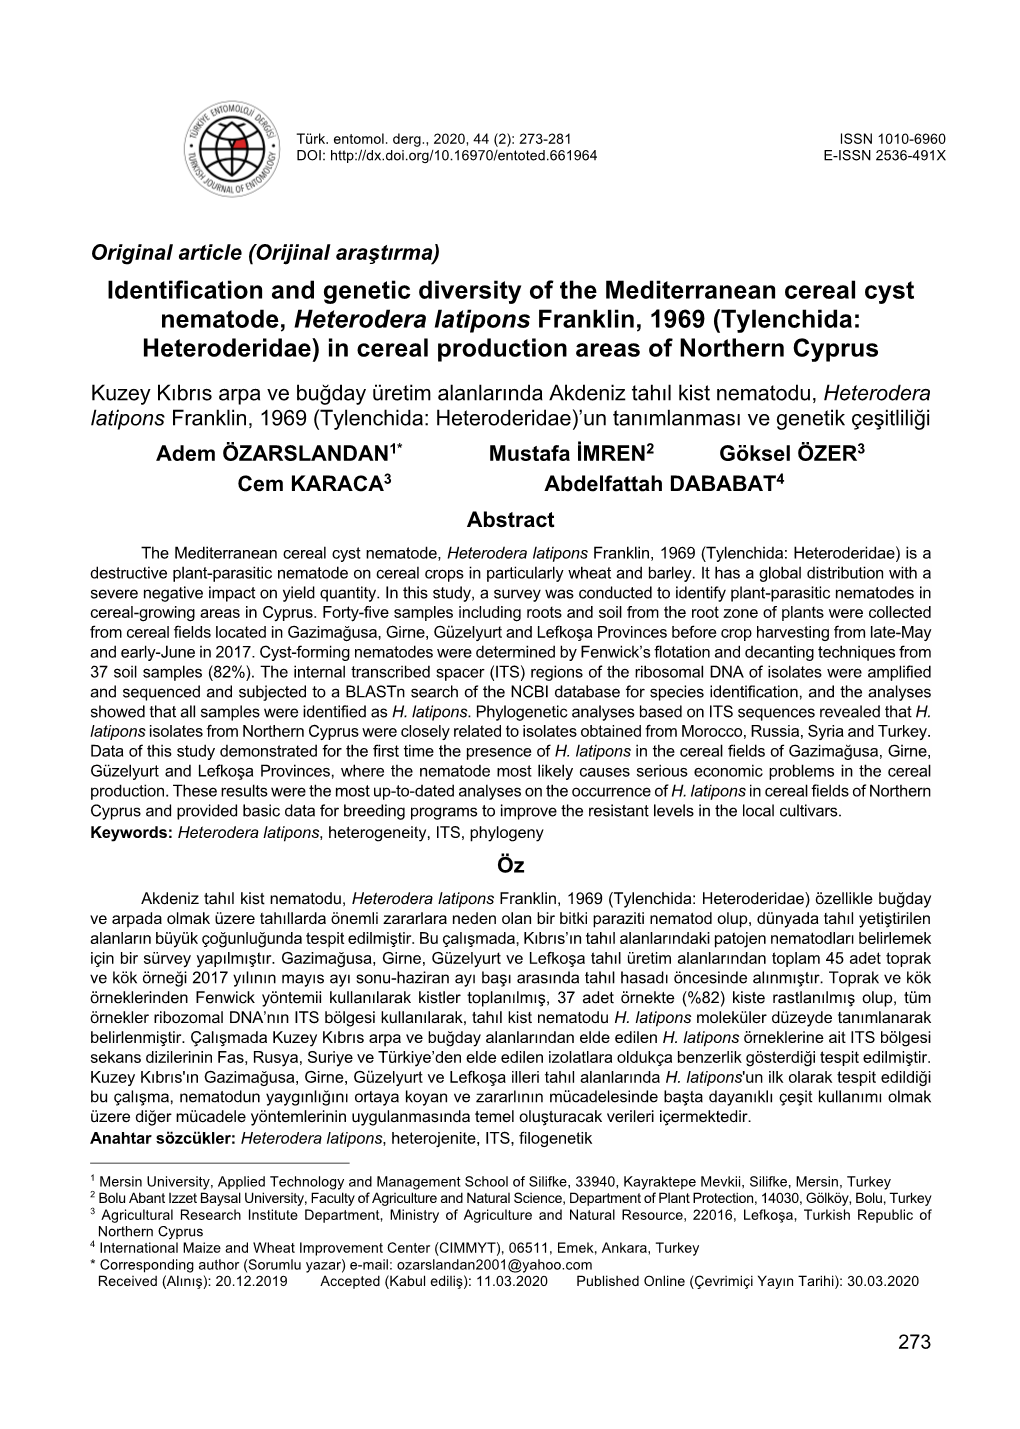 Identification and Genetic Diversity of the Mediterranean